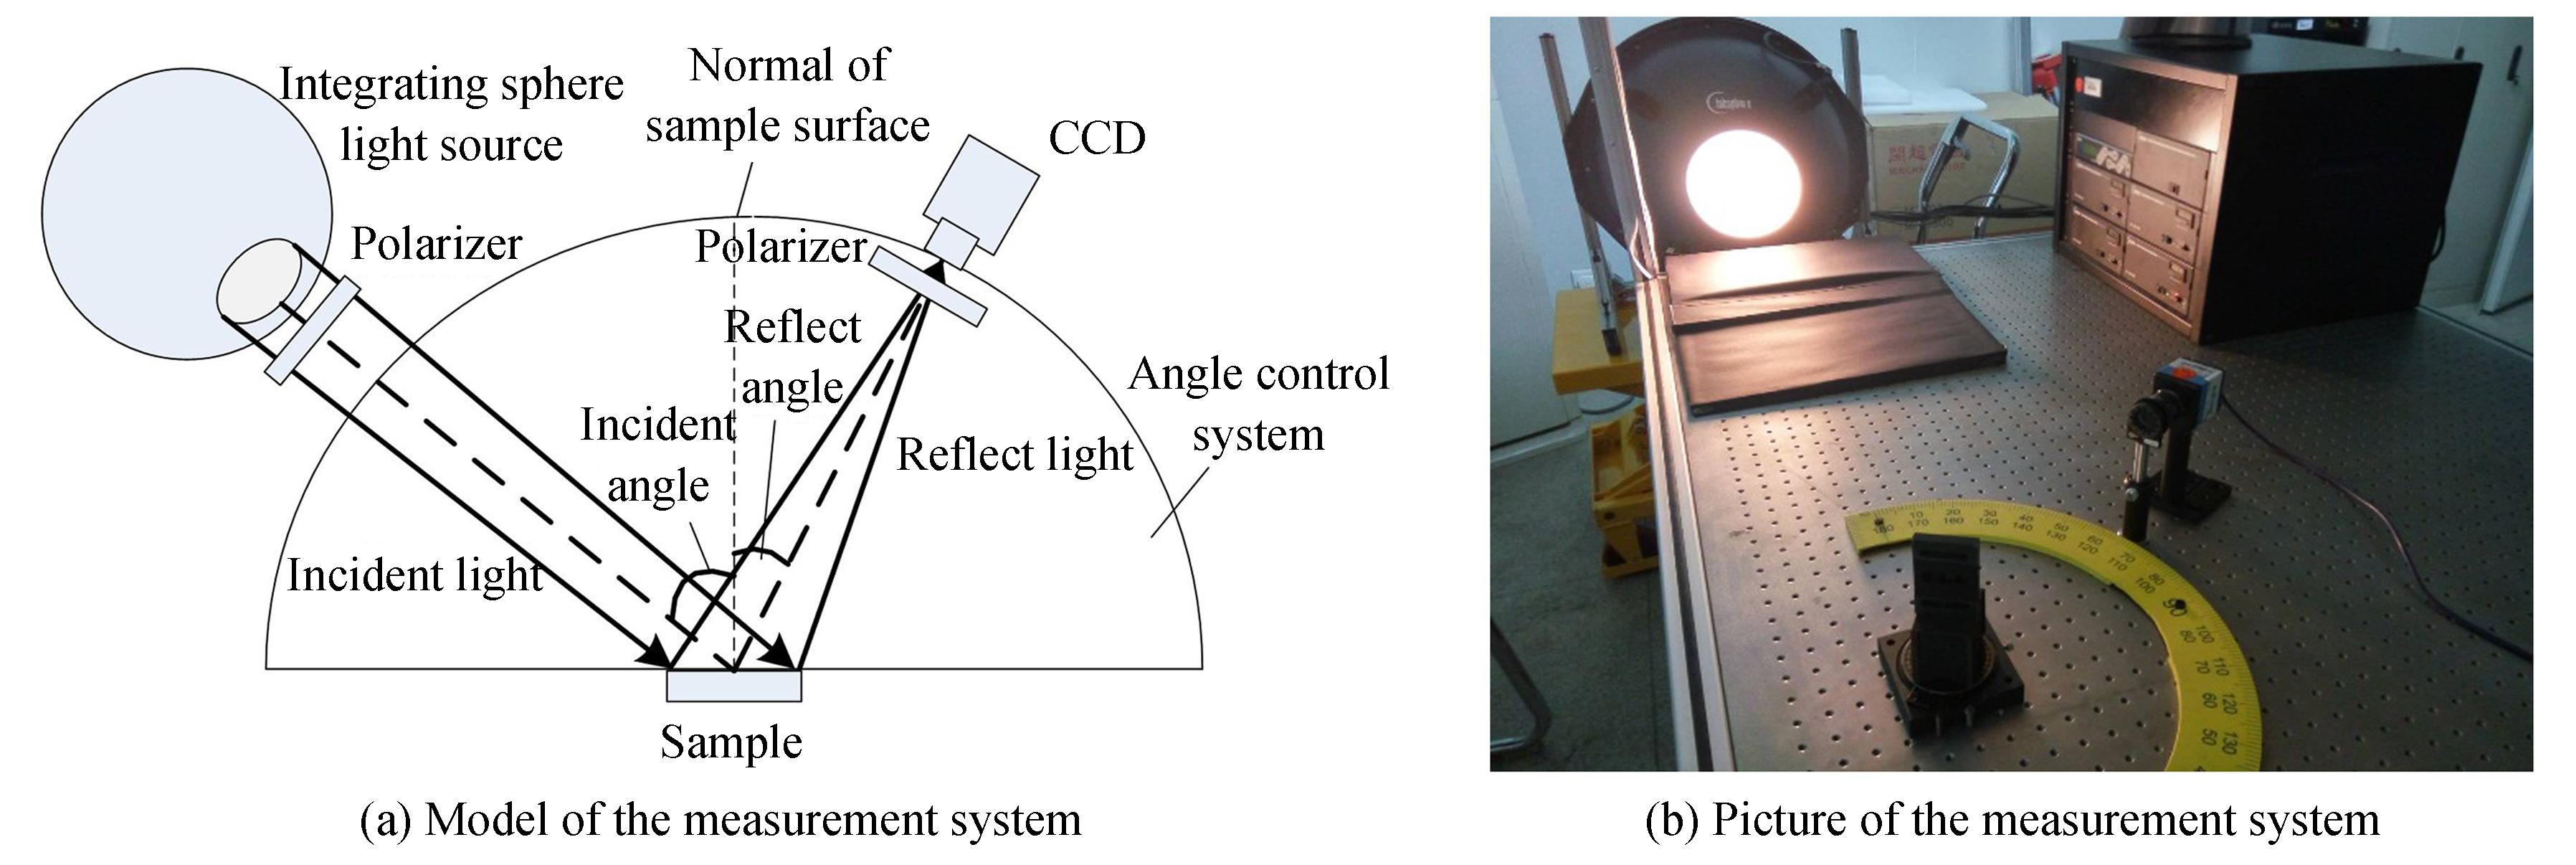 The measurement system for passive polarization characteristic